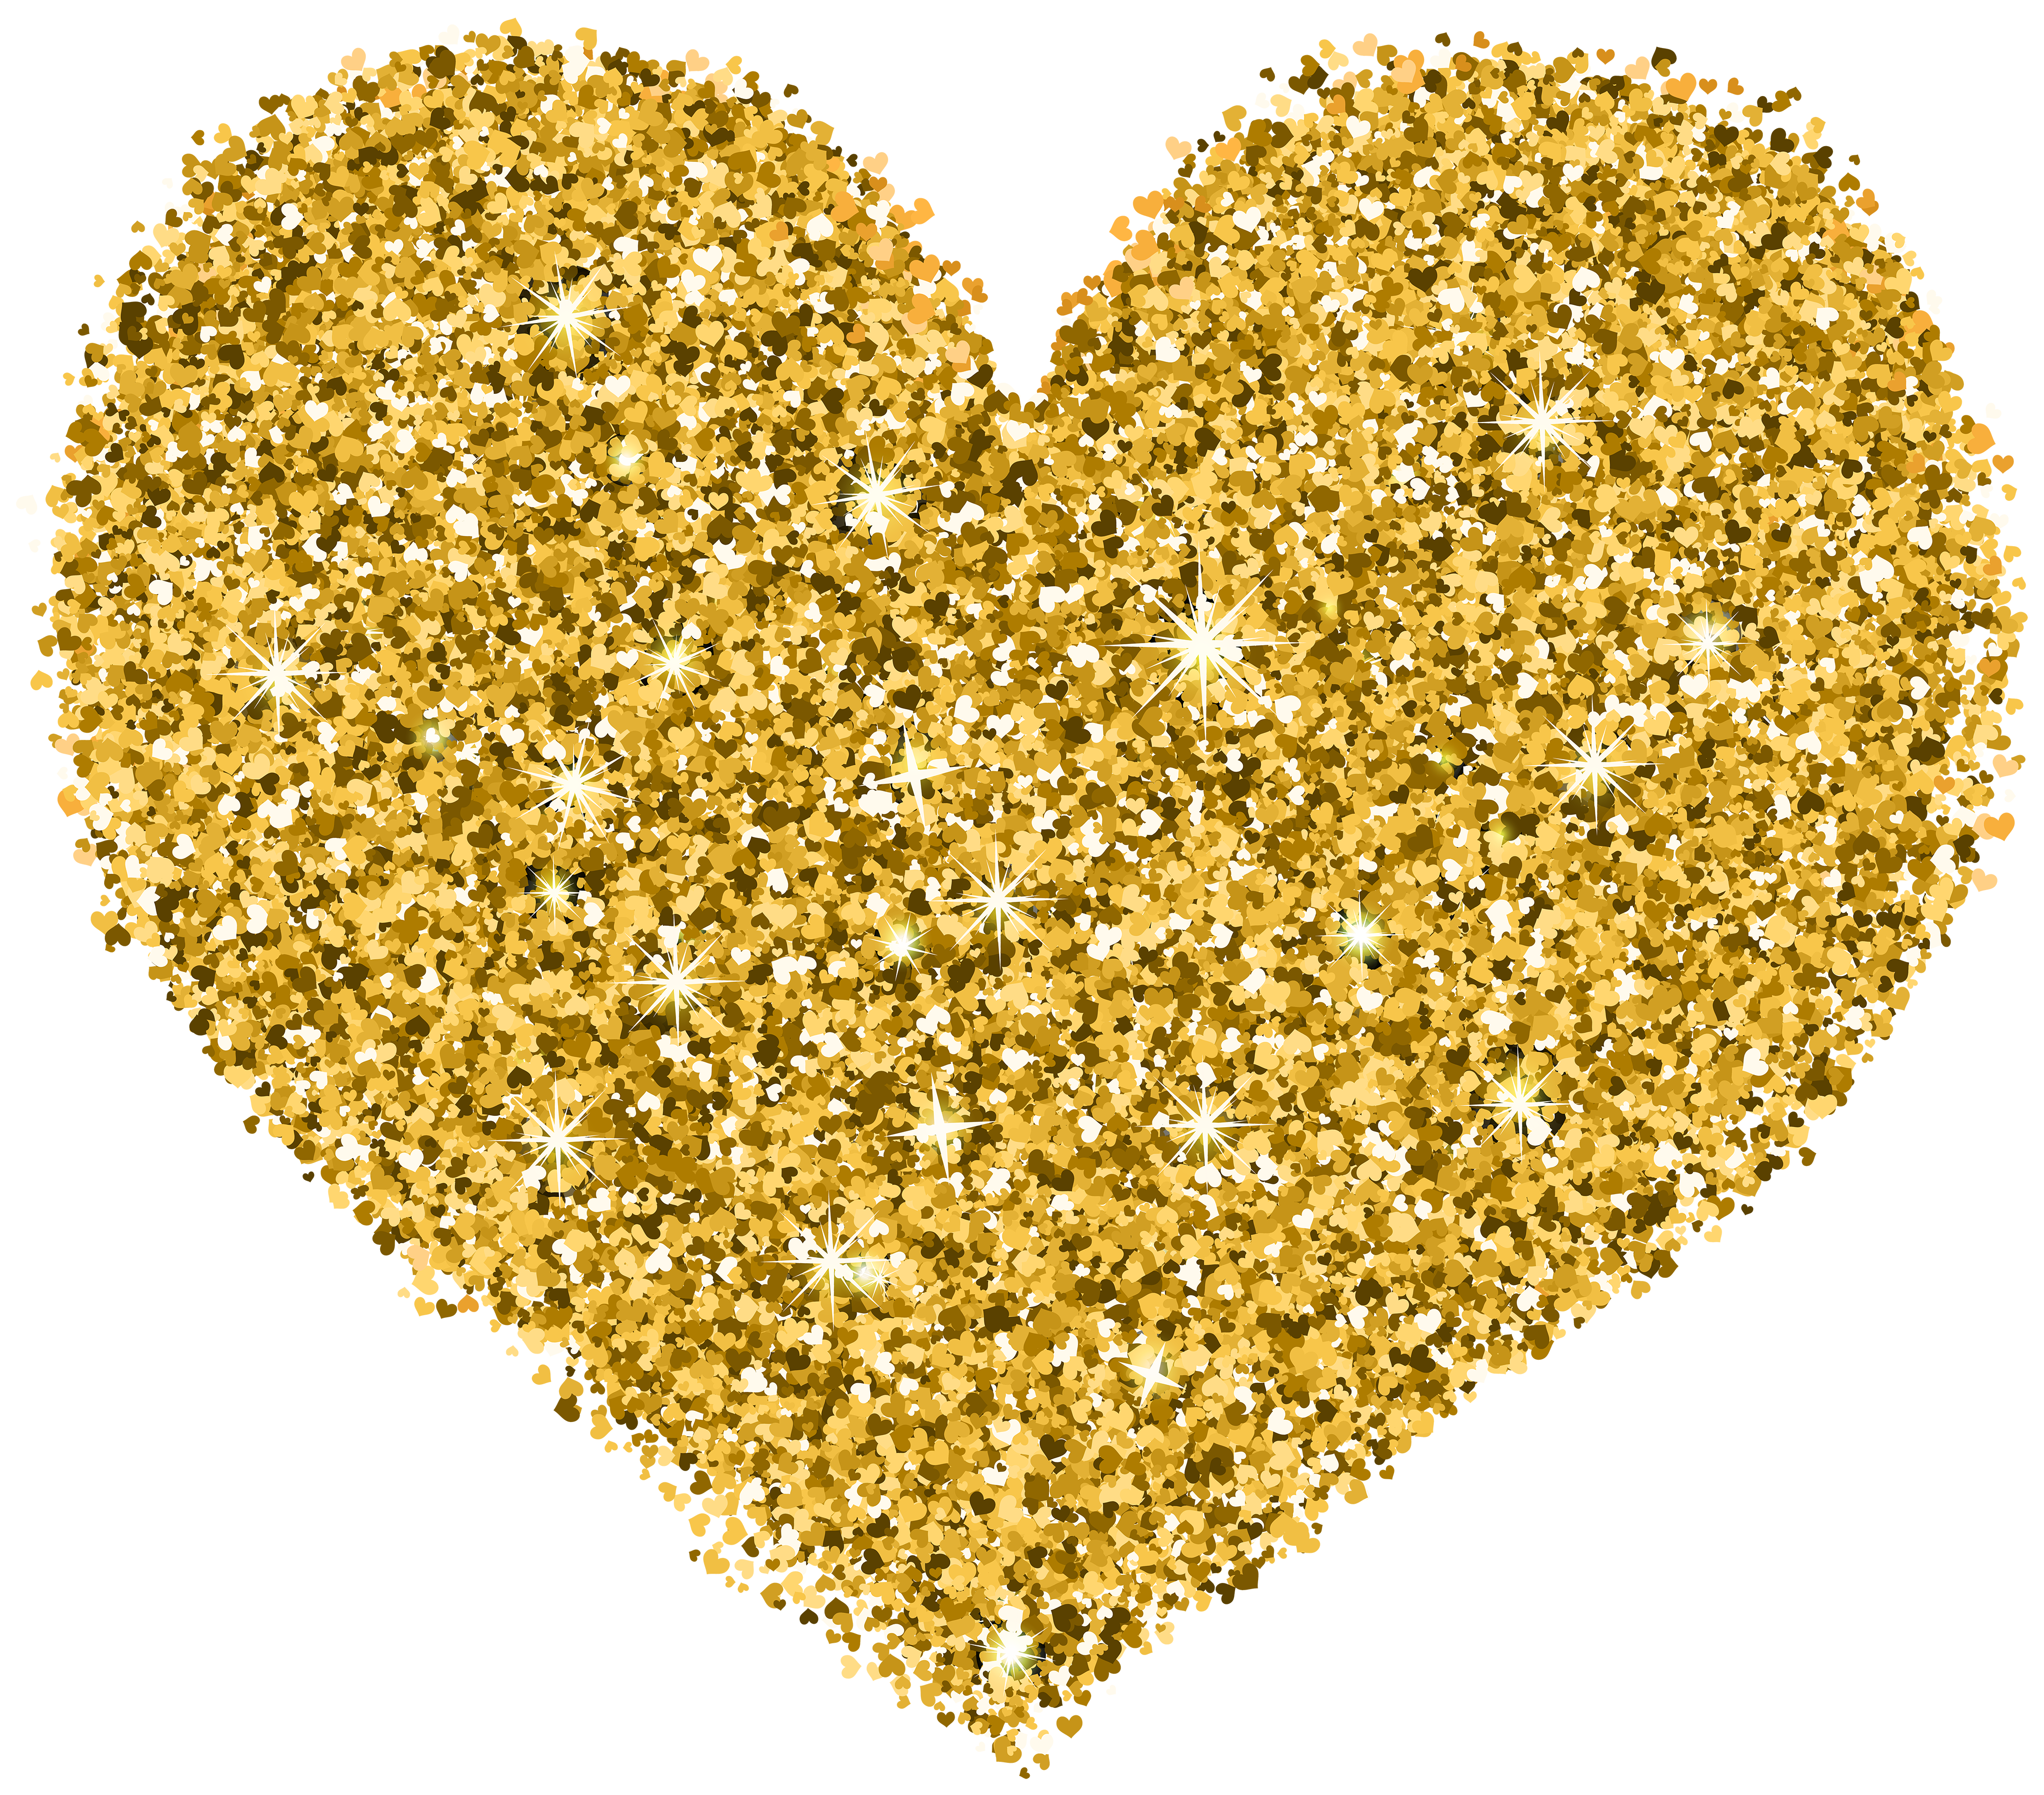 Decorative Golden Heart Transparent Image Quality Image And Transparent PNG Free Clipart